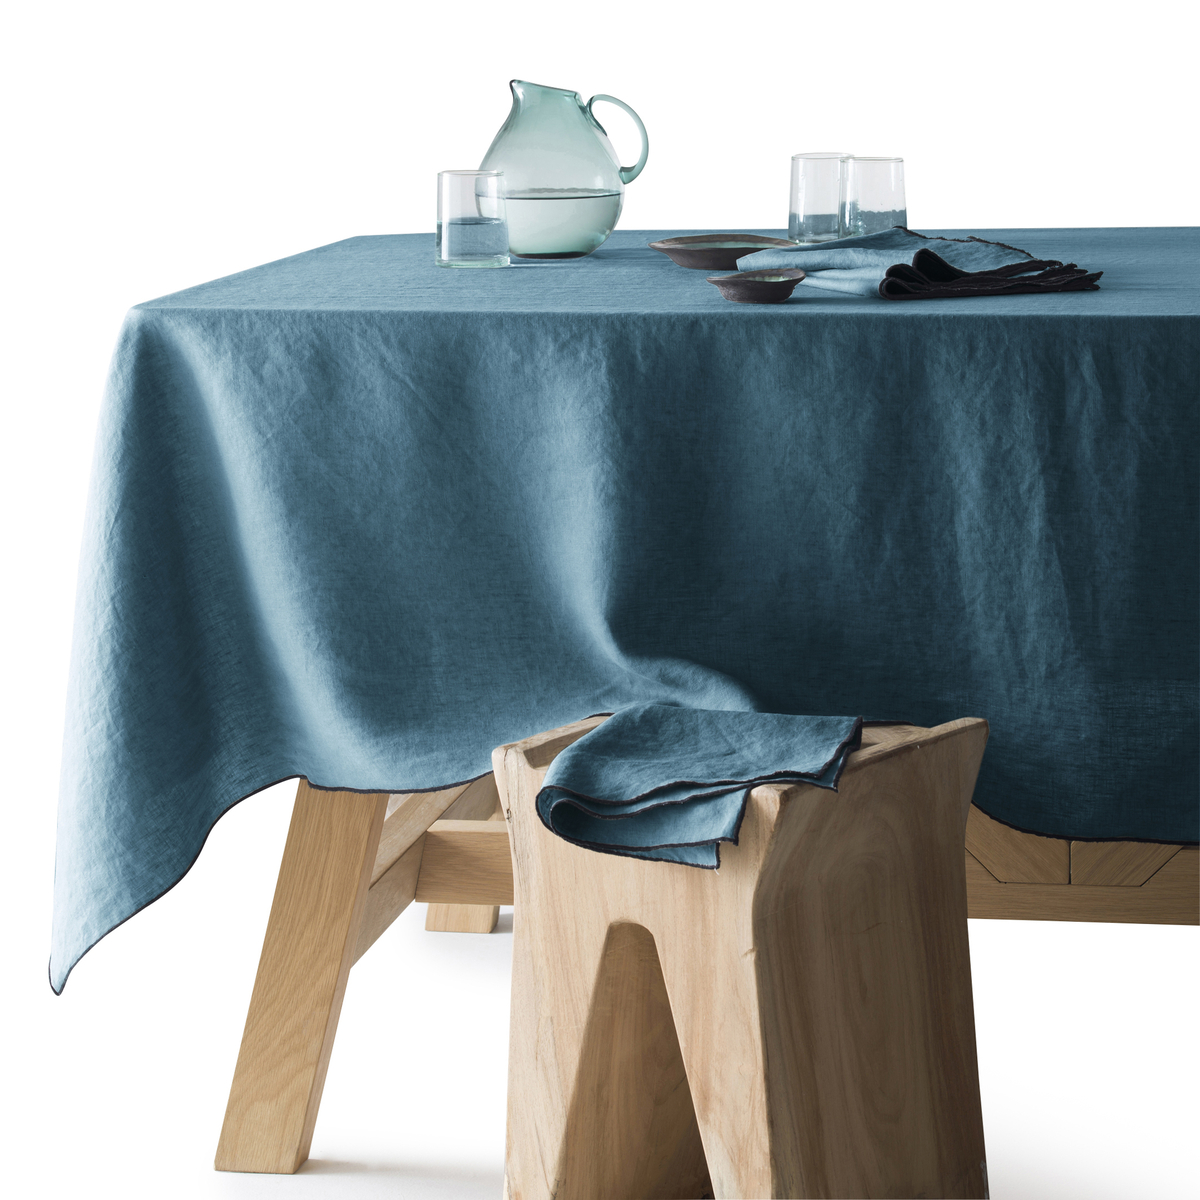 Suzy 100% Washed Linen Tablecloth